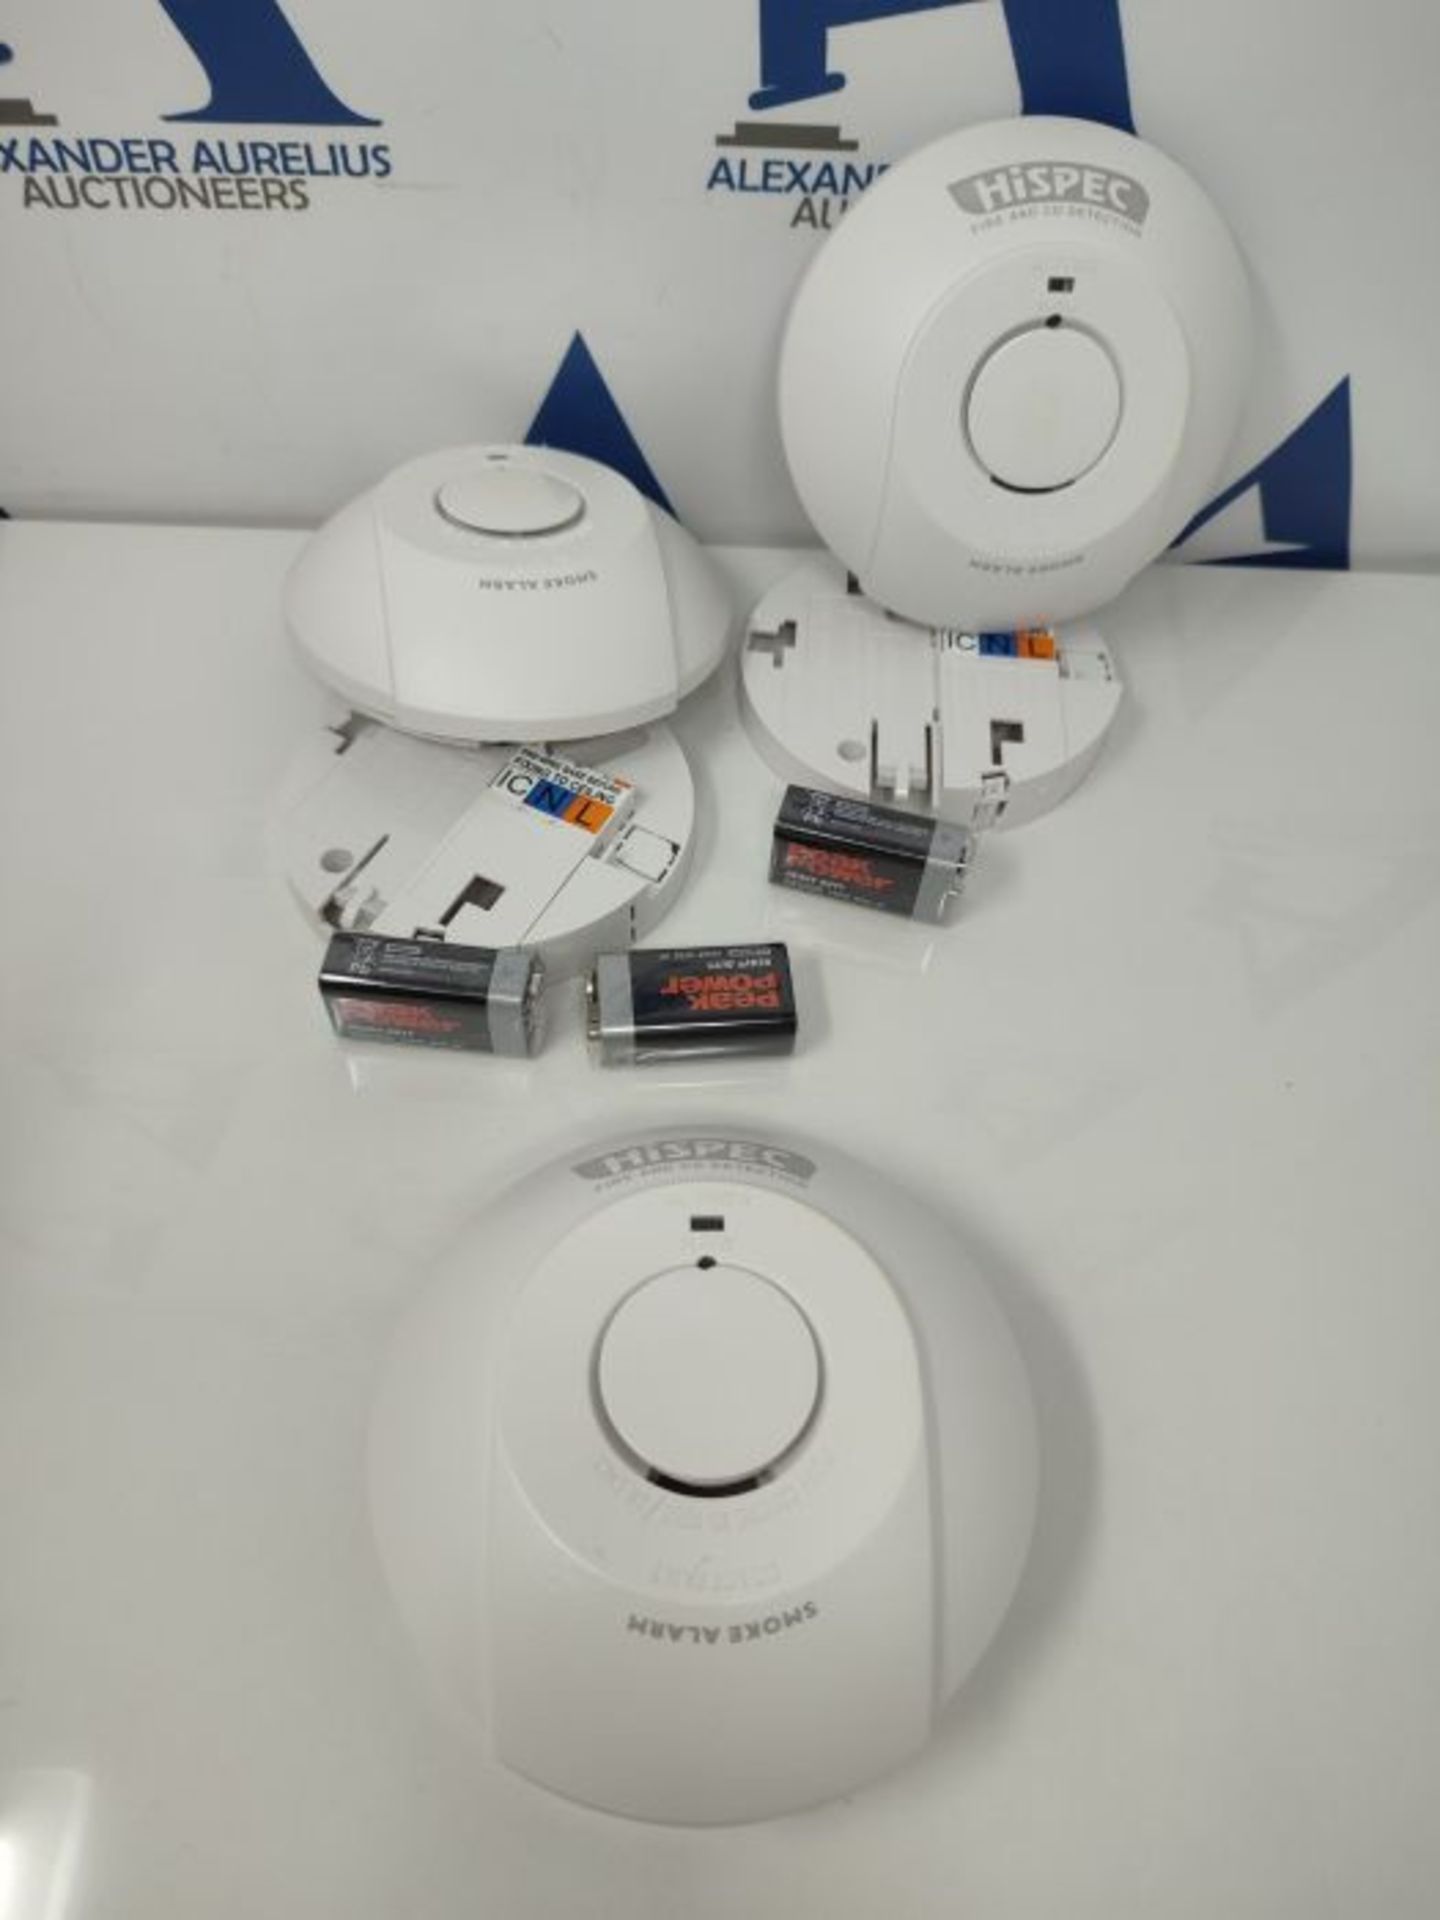 RRP £117.00 HiSPEC Smoke Alarms Heat Detectors and CO Detectors - Fire Safety Kits: Fully Complian - Image 2 of 2